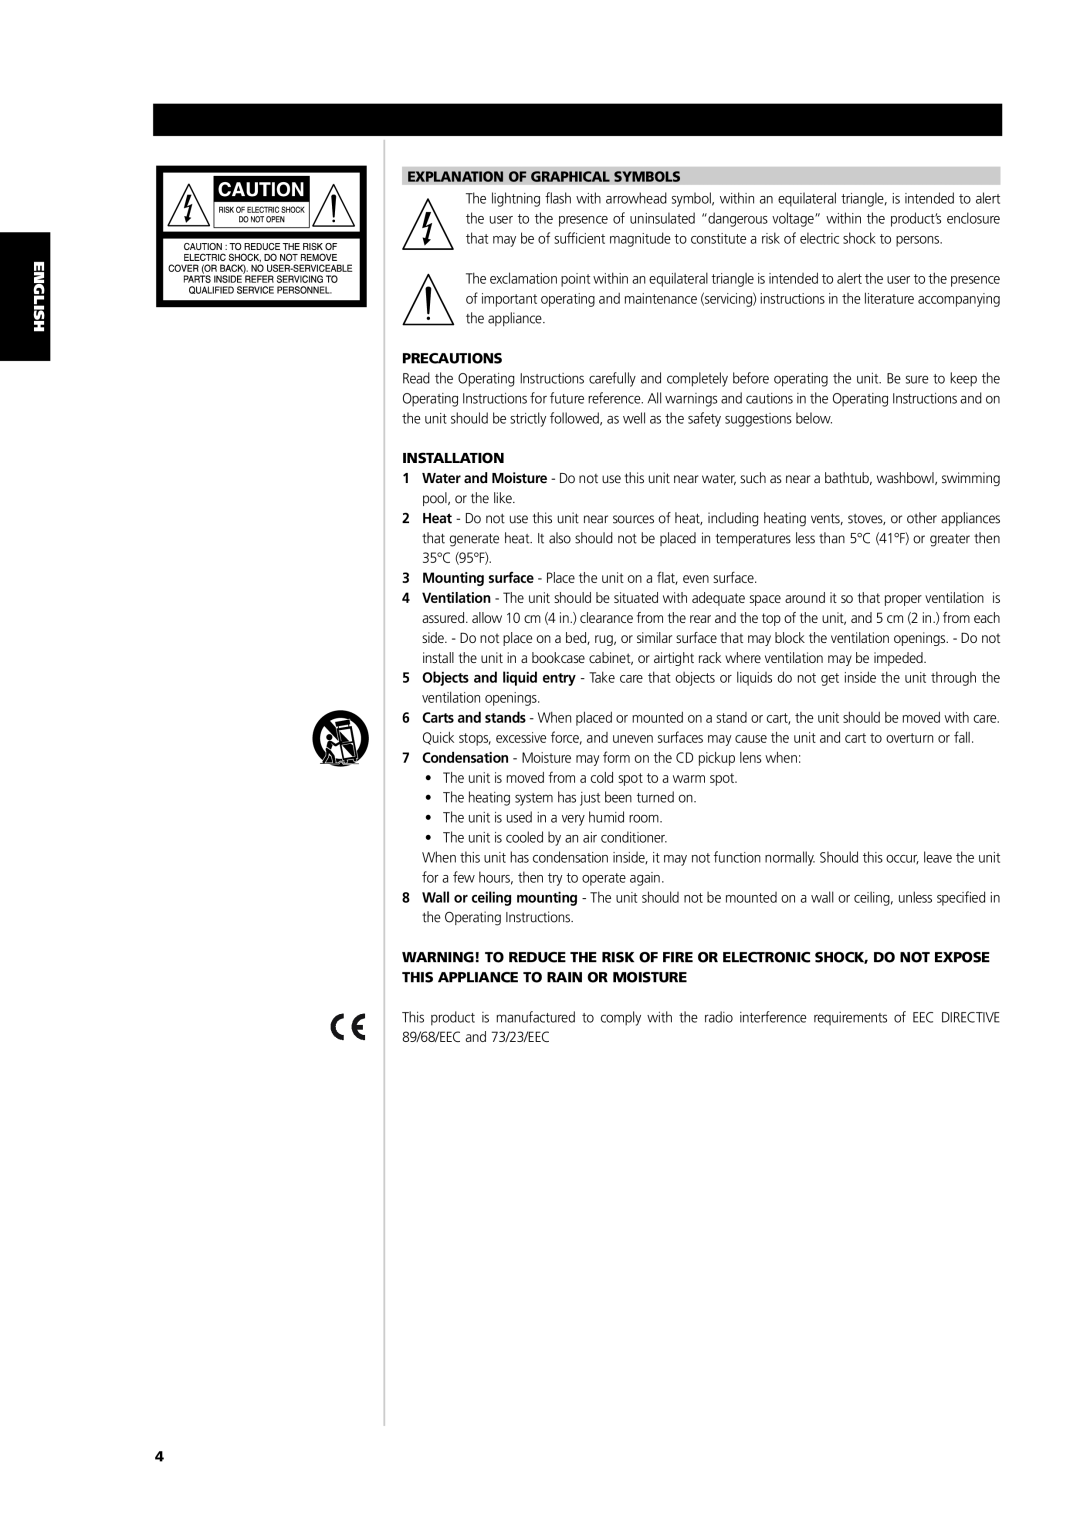 NAD T742 owner manual Explanation Of Graphical Symbols, Precautions, Installation 